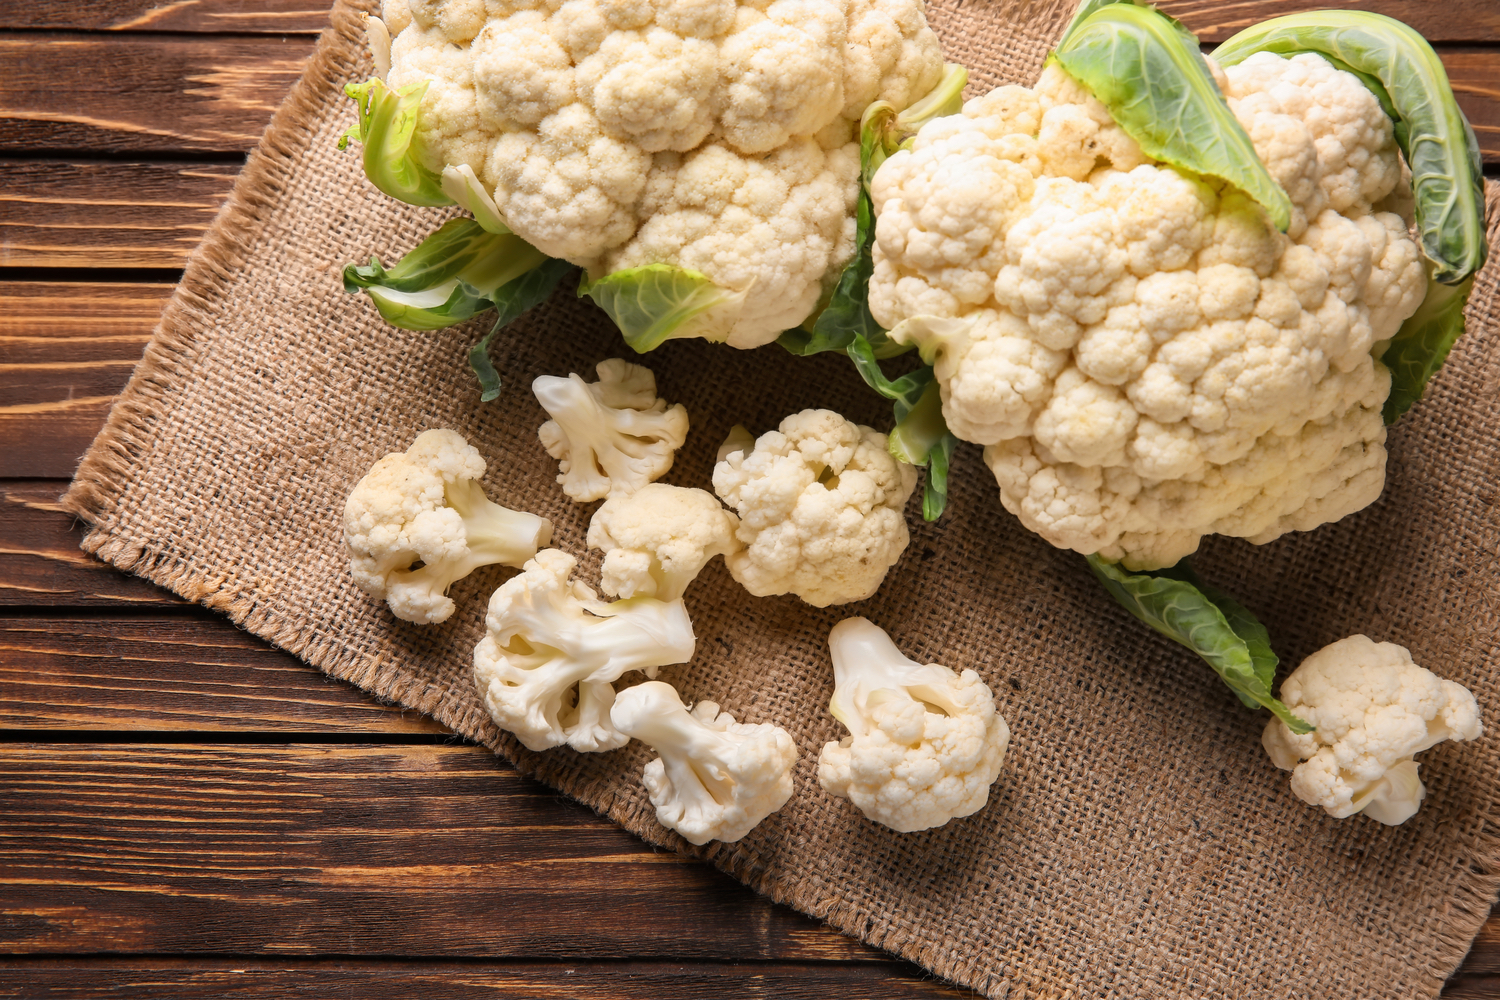 Cauliflower Benefits and Nutritional Profile